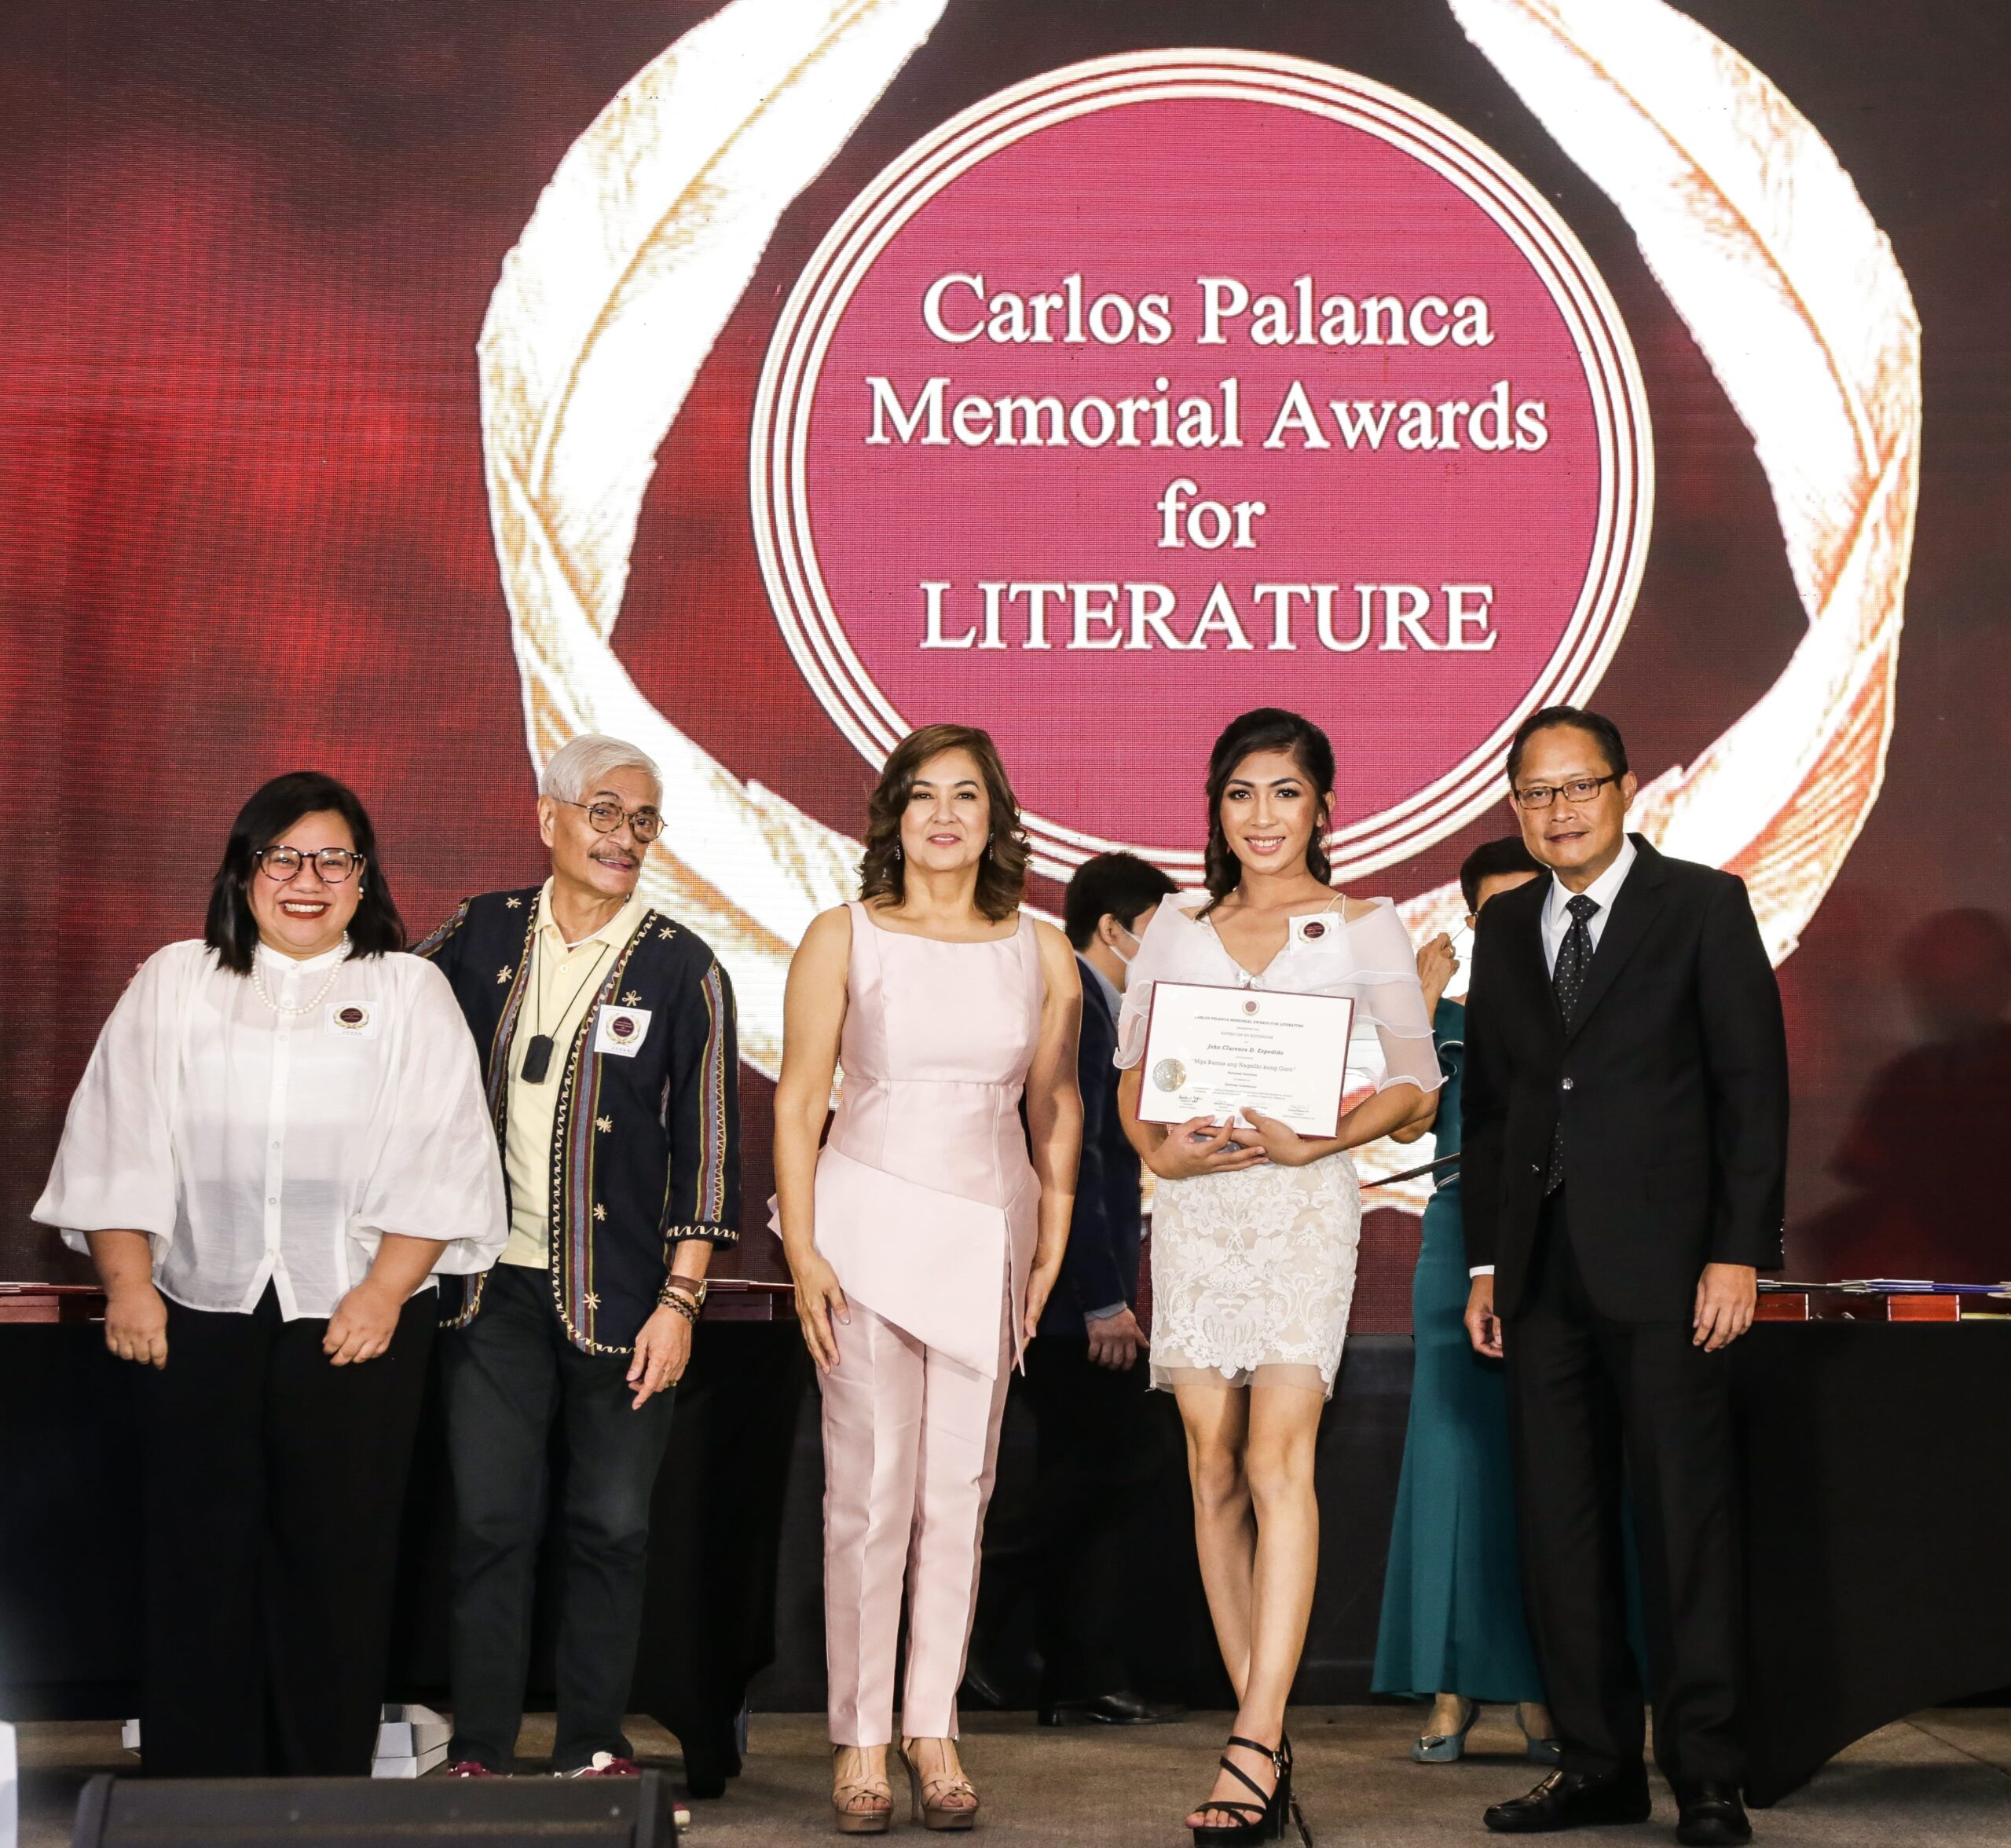 70th Palanca Awards holds annual ceremony to honor winners